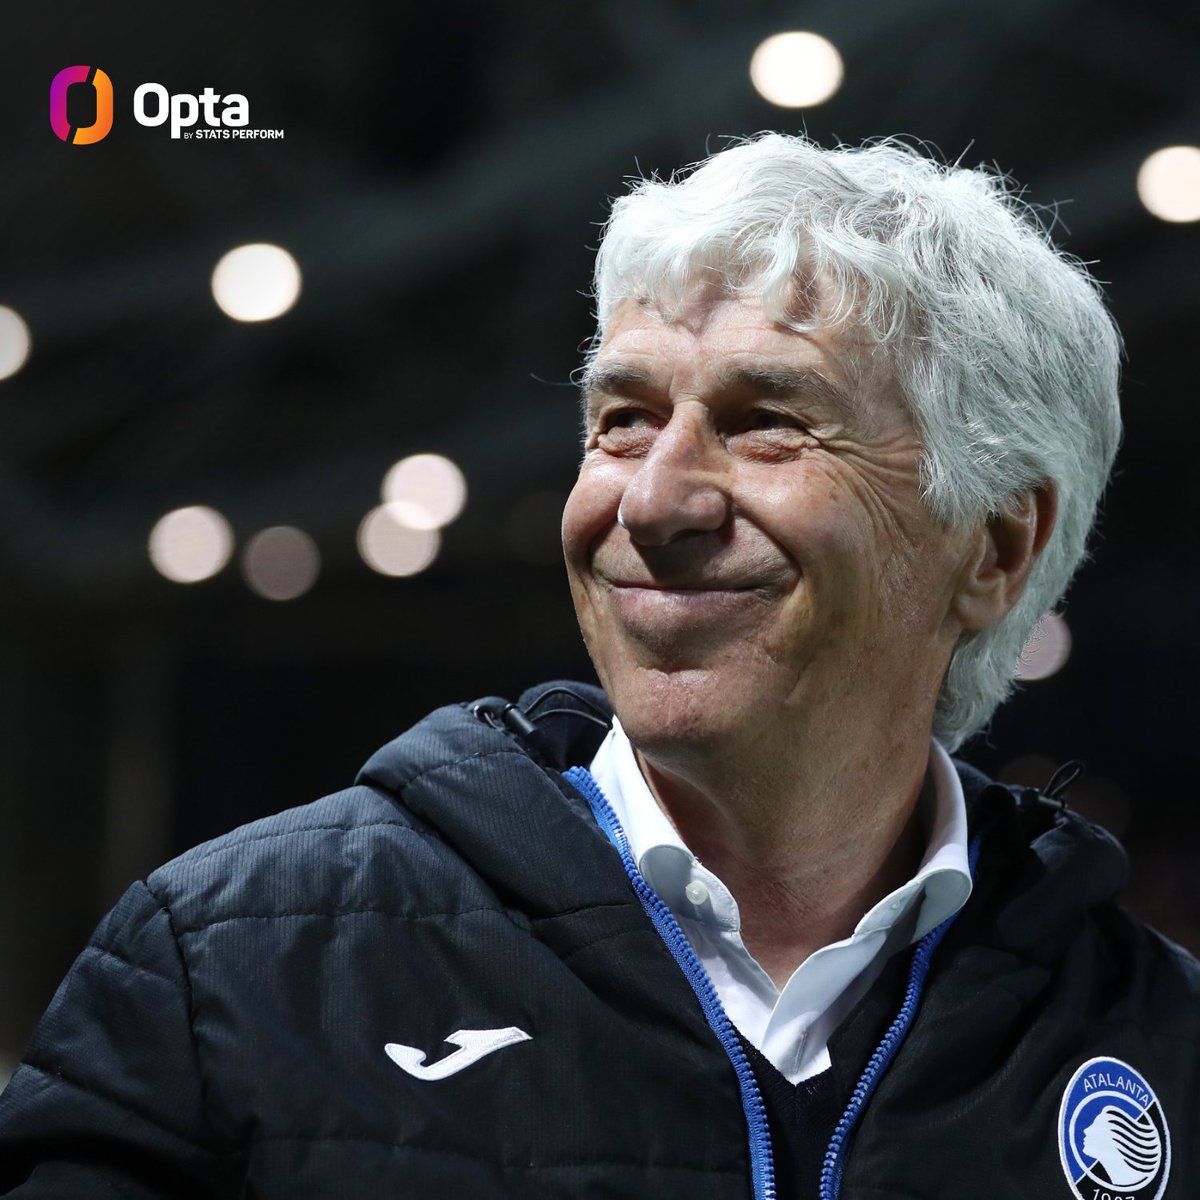 66 - At 66 years and 117 days, Gian Piero #Gasperini is the oldest coach to win his debut major European final, and the second Italian coach to win the UEFA Europa League after Maurizio Sarri in 2019. Master.

#UELFinal #AtaLev